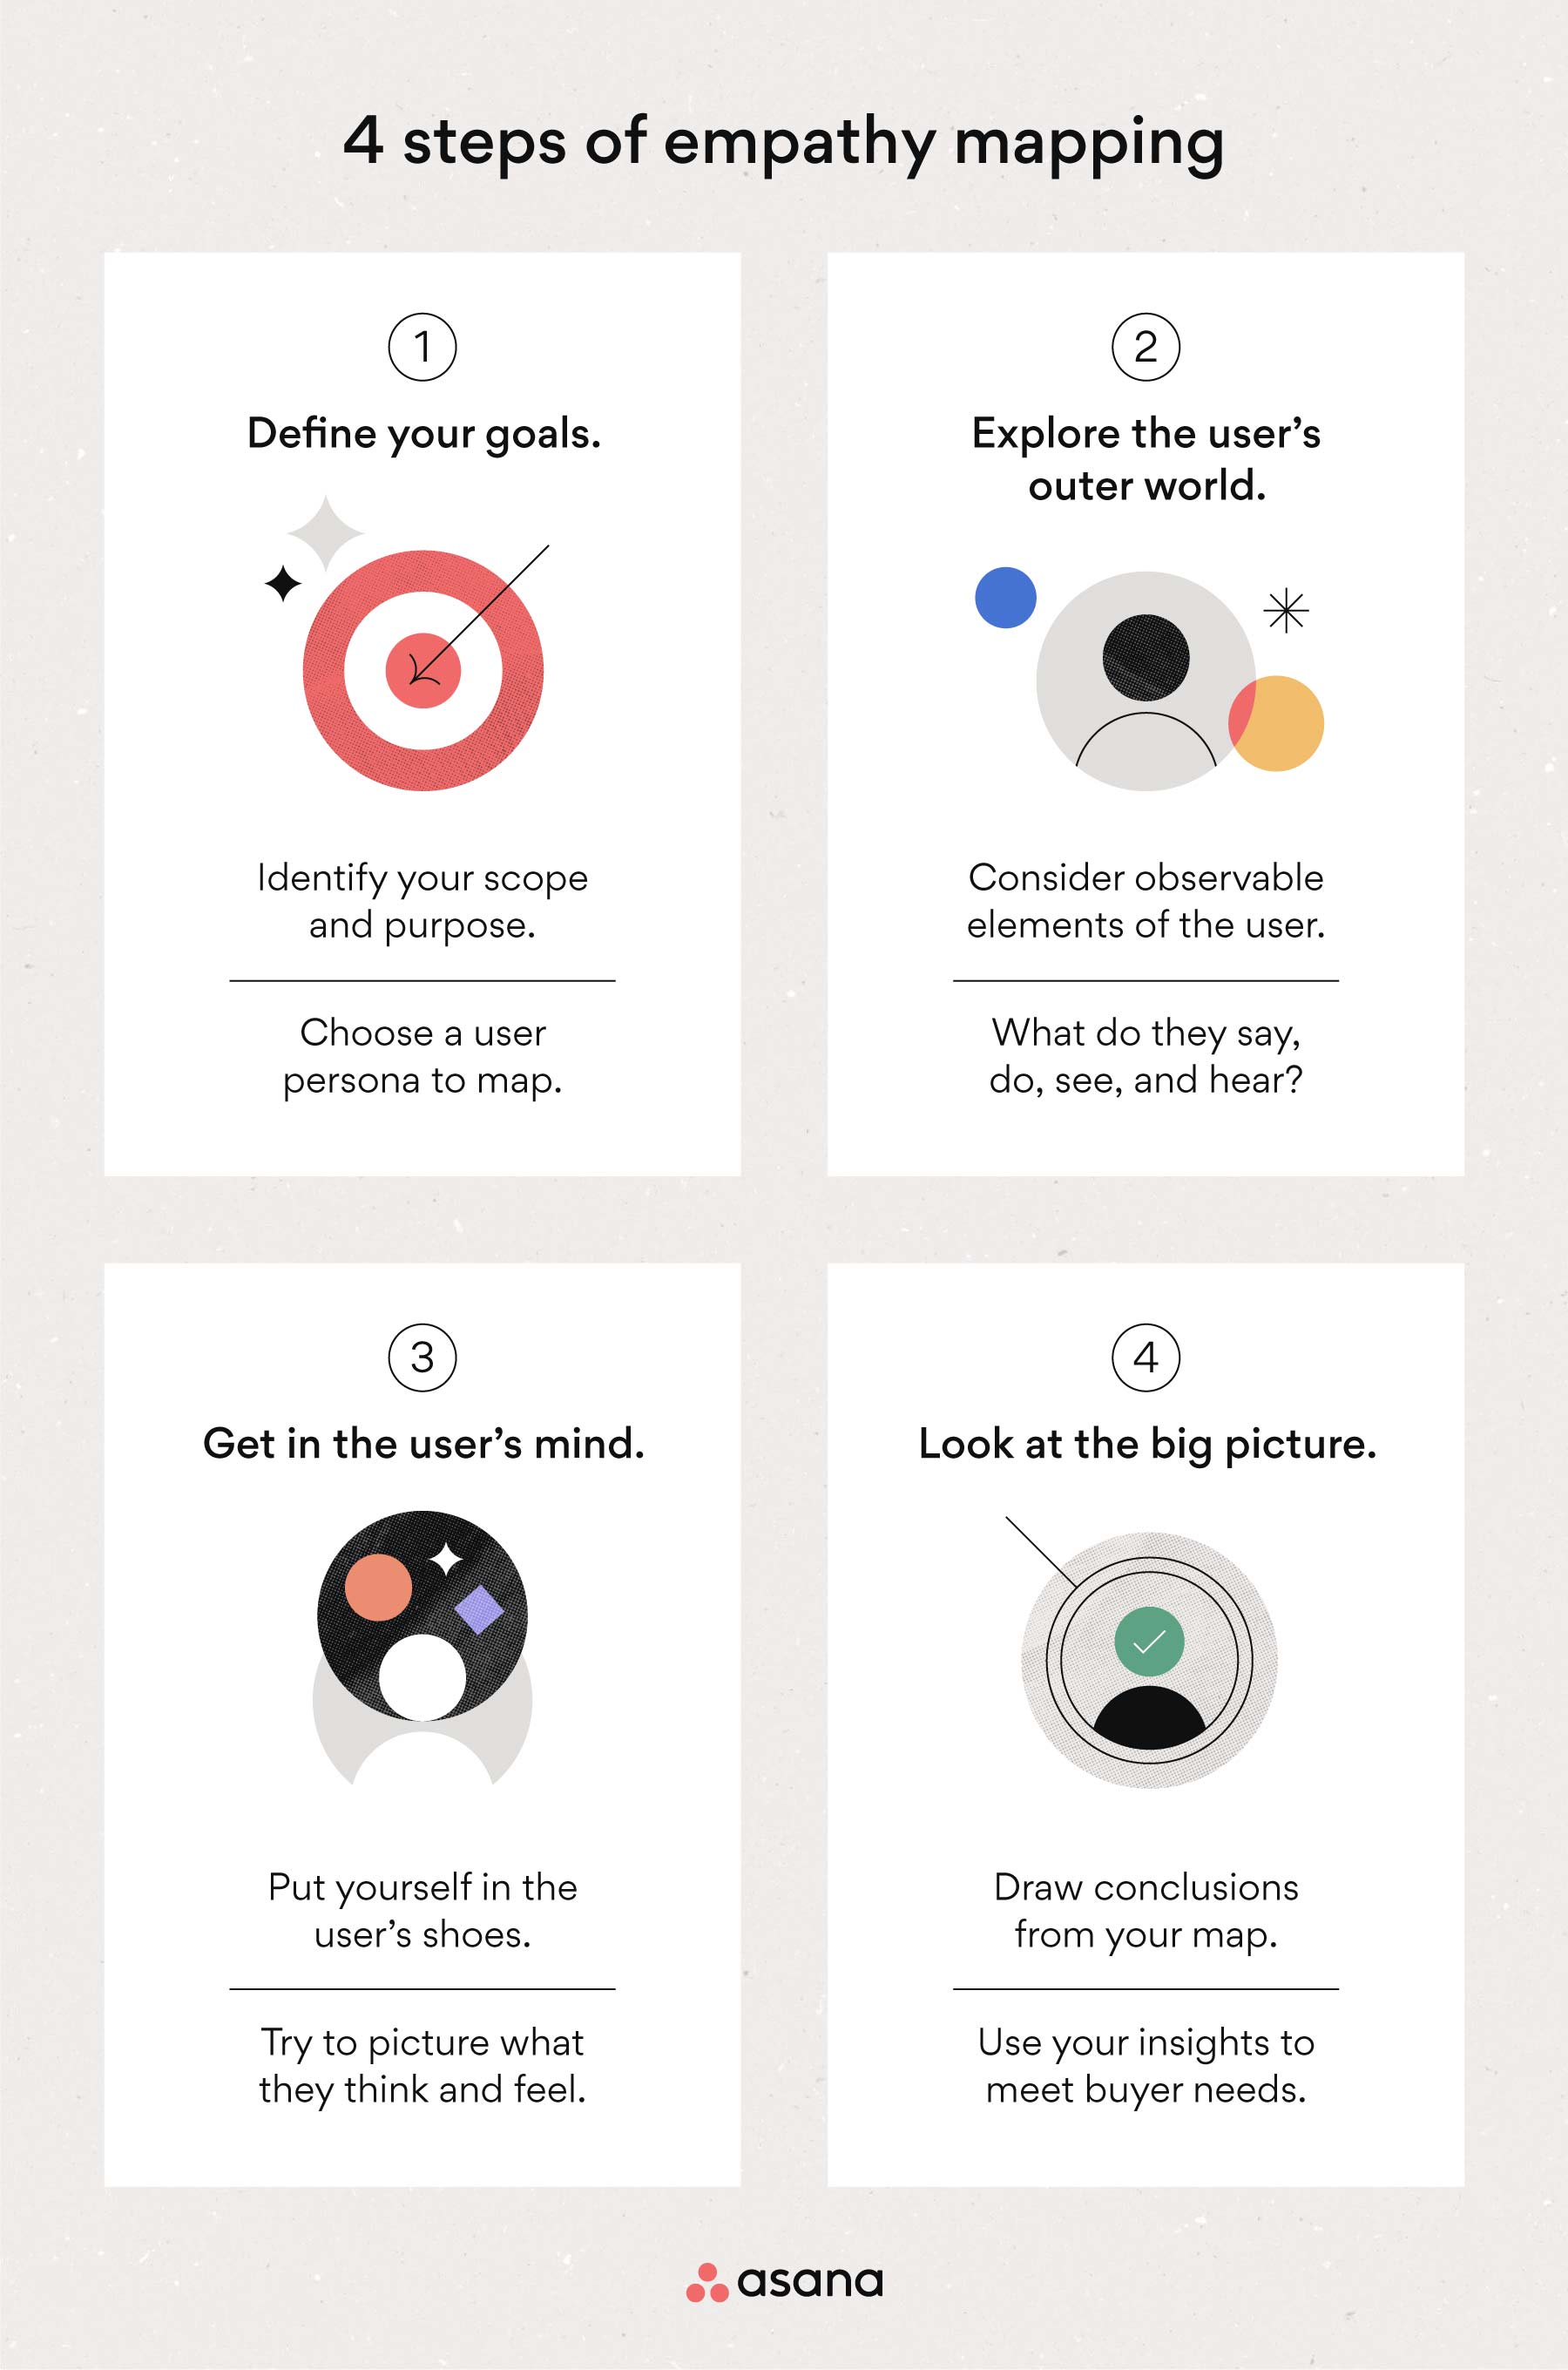 [inline illustration] 4 steps of empathy mapping (infographic)